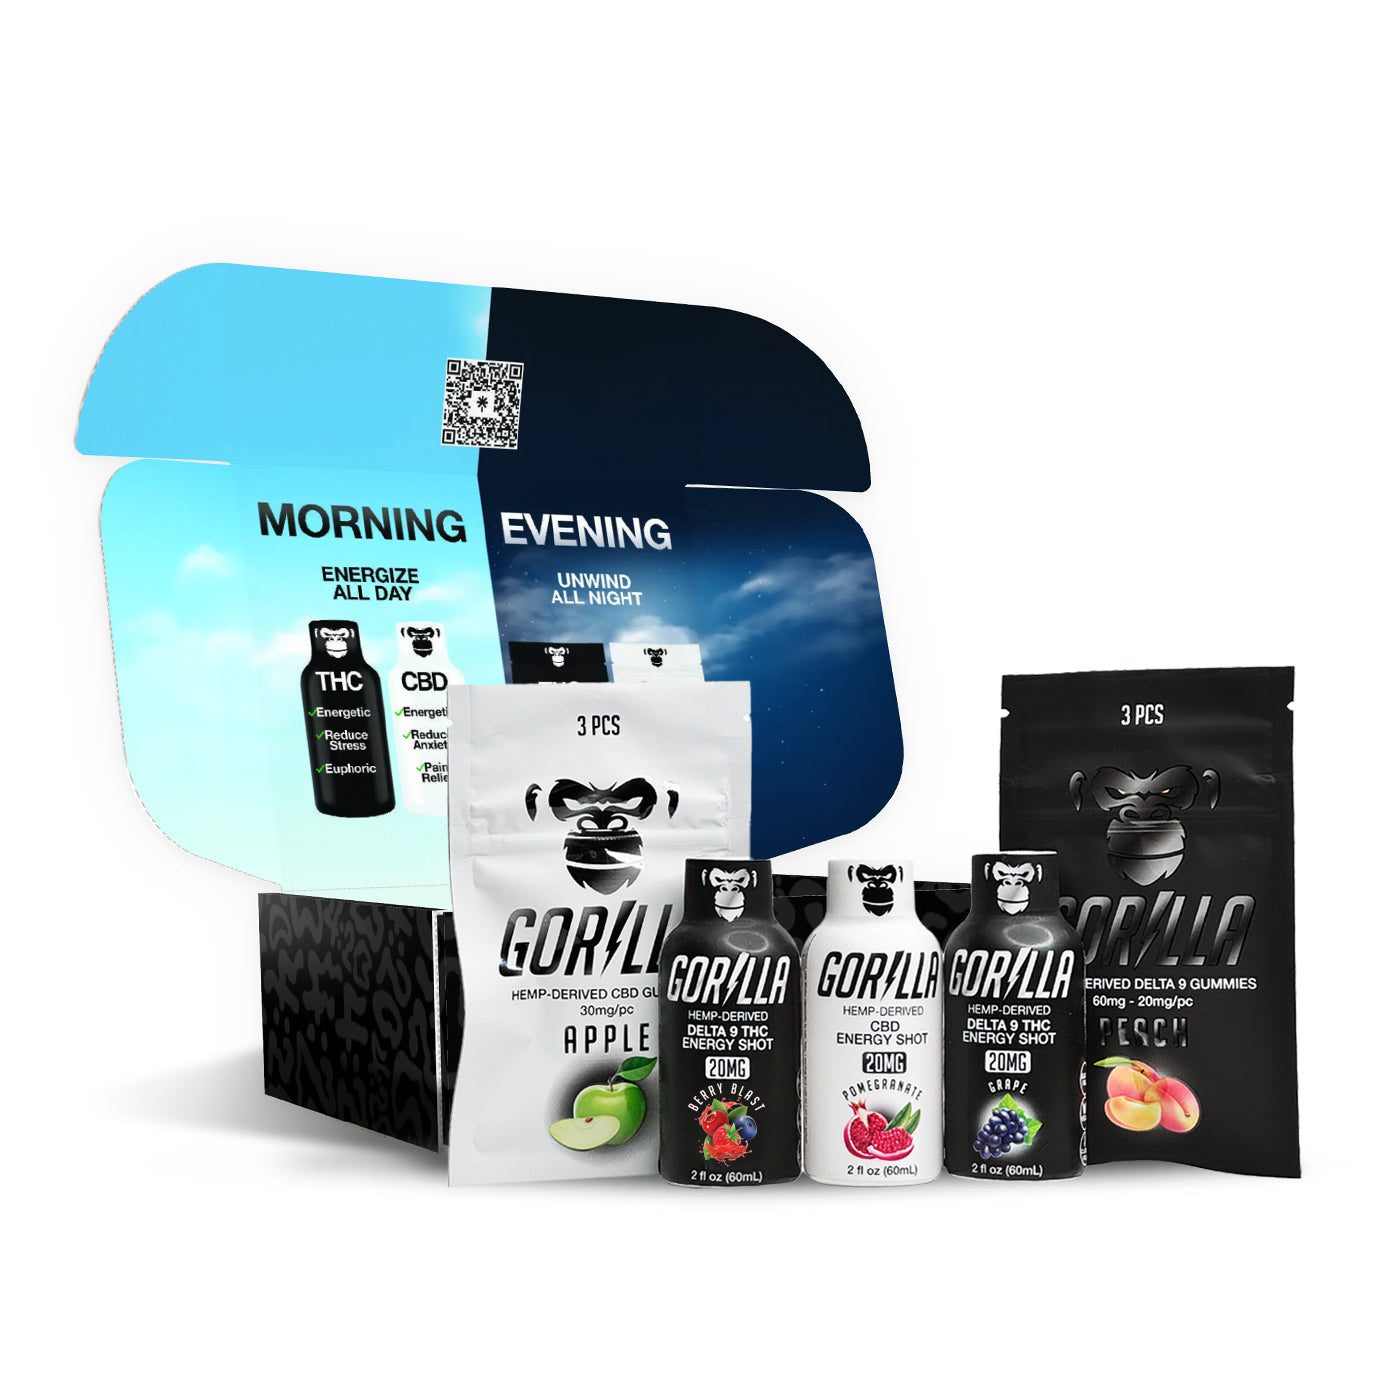 Morning & Evening Kit (Limited Edition)